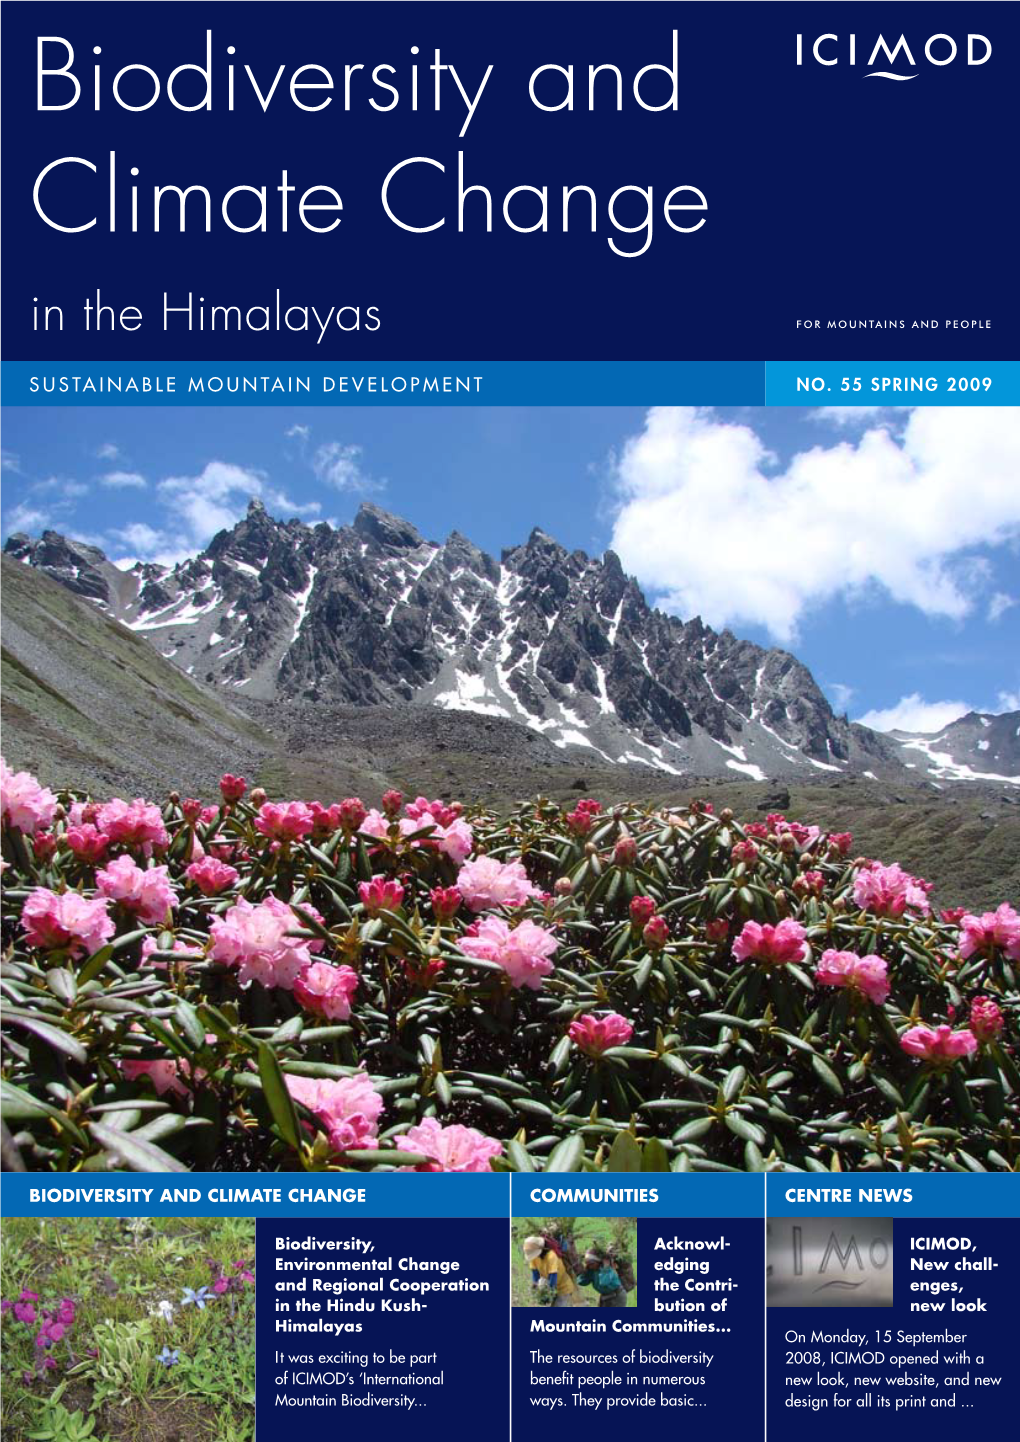 Biodiversity and Climate Change in the Himalayas